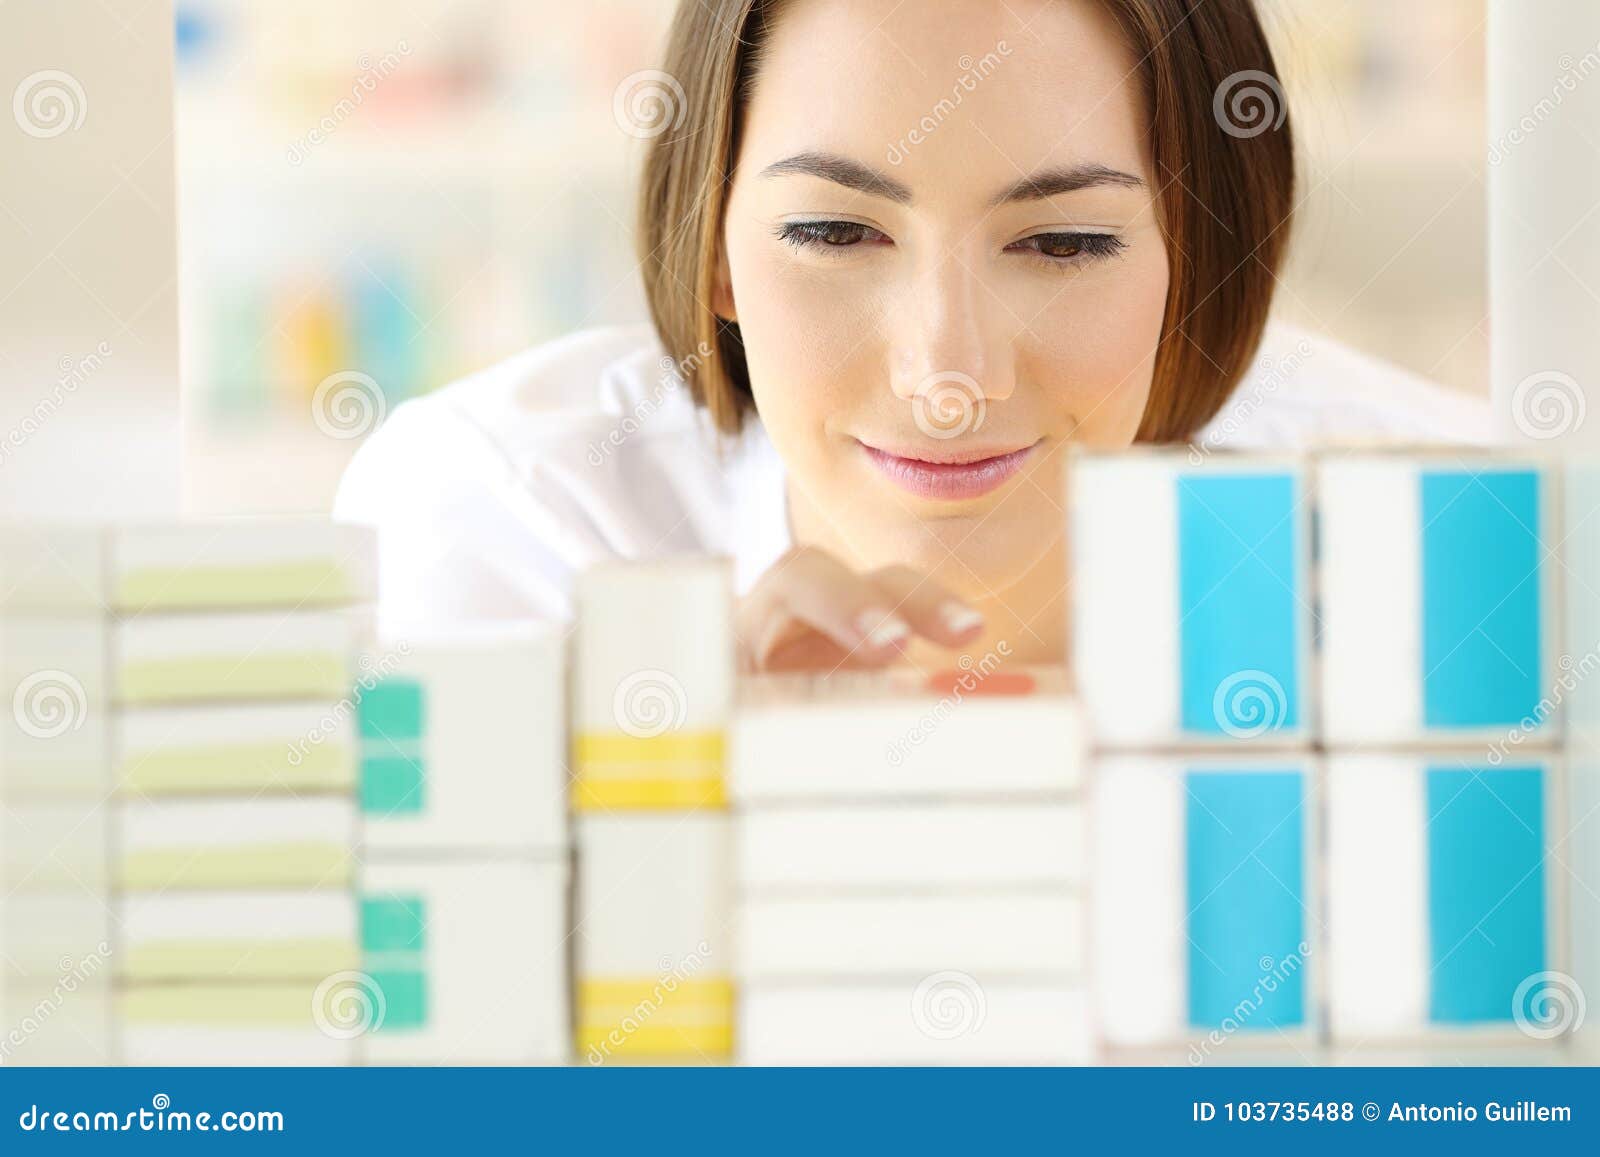 1,003 Pharmacy Shelf Painkillers Images, Stock Photos, 3D objects, &  Vectors